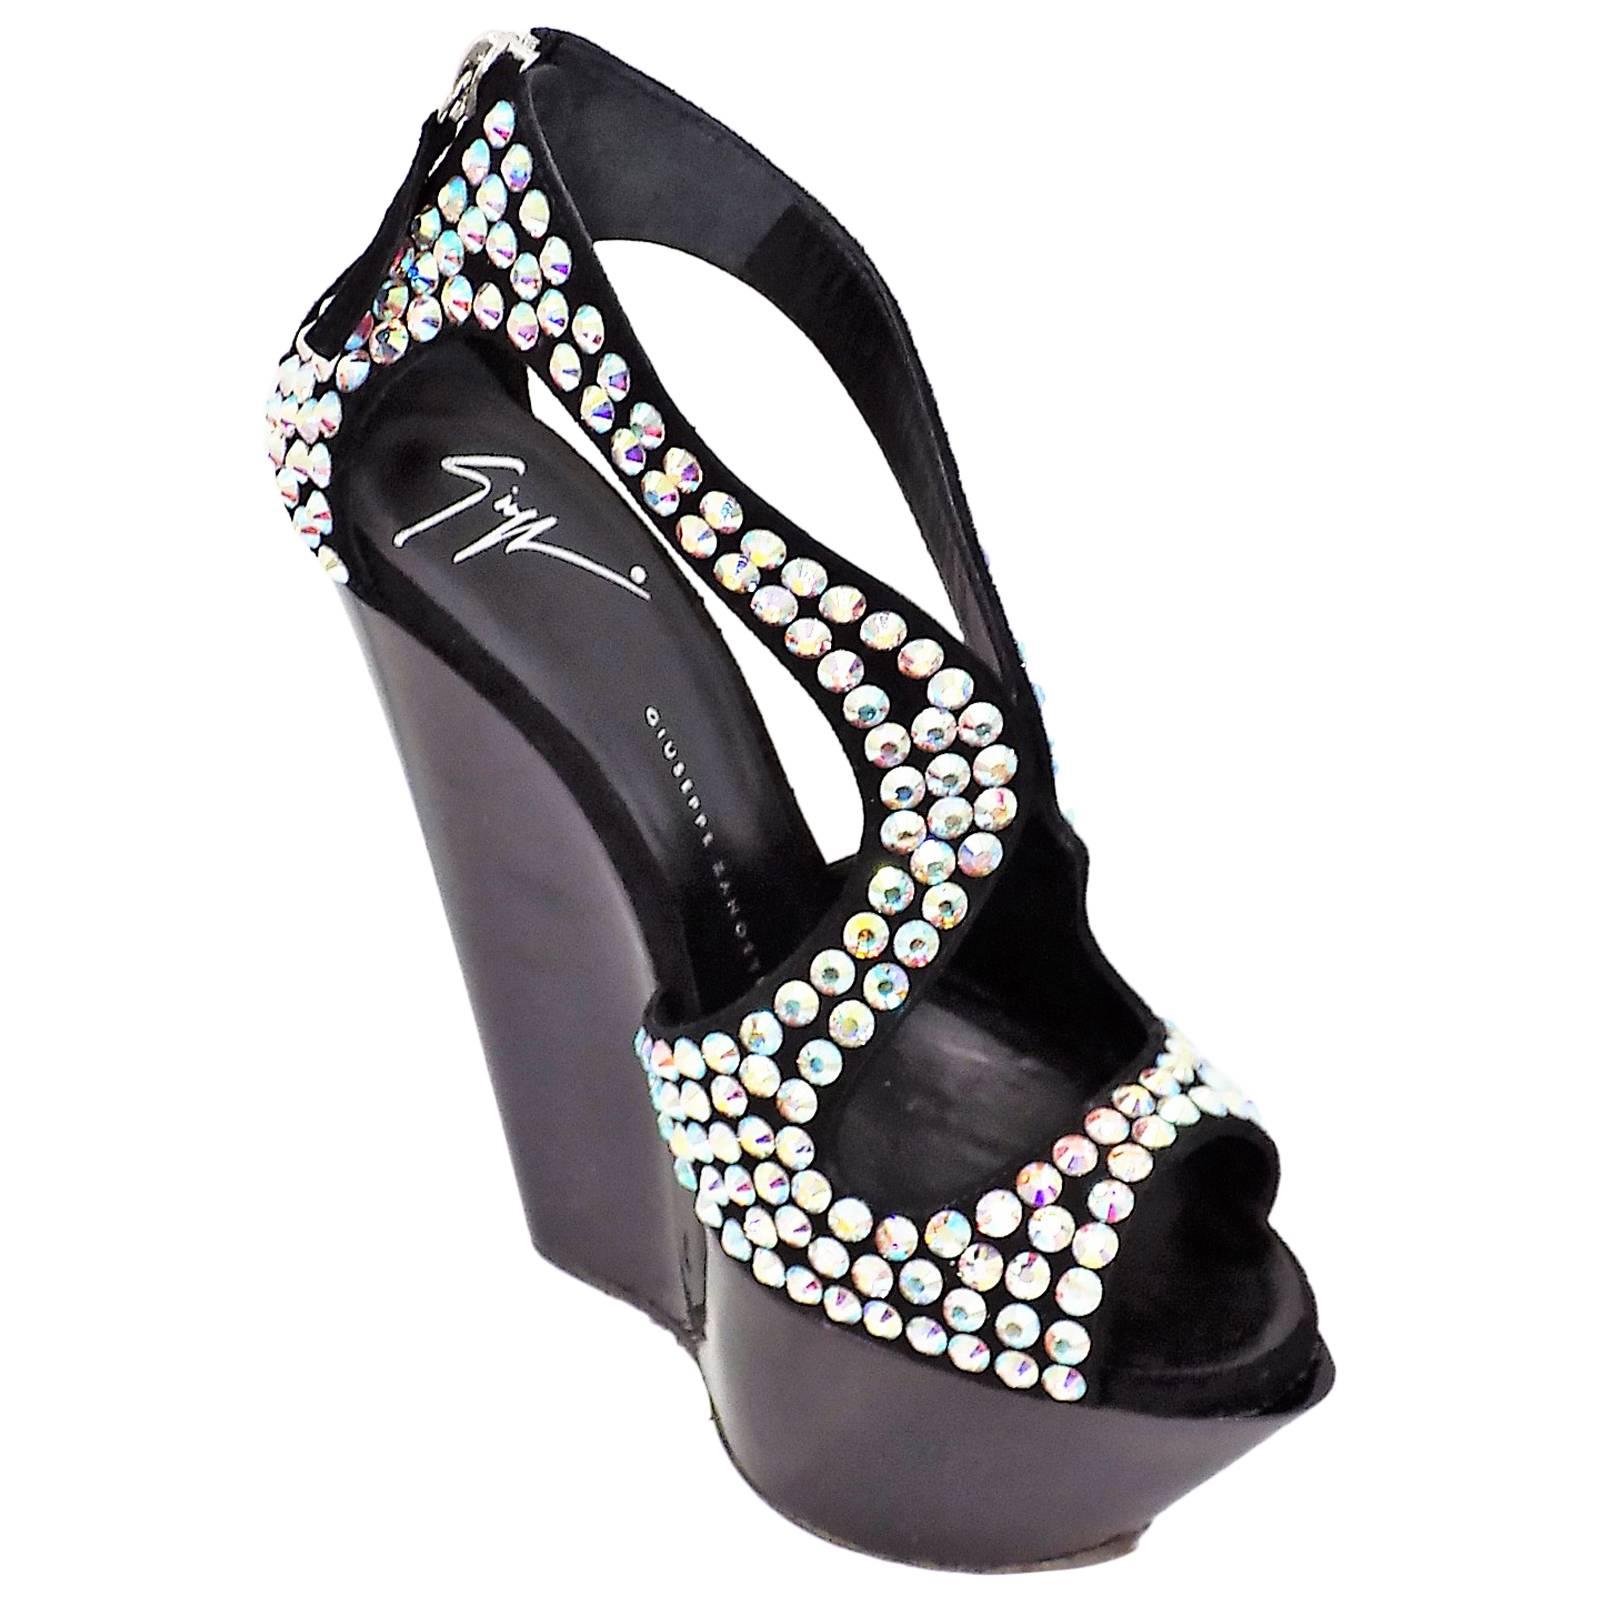 Giuseppe Zanotti Limited Edition  Lucite platform wedges w/h large crystals Shoe For Sale